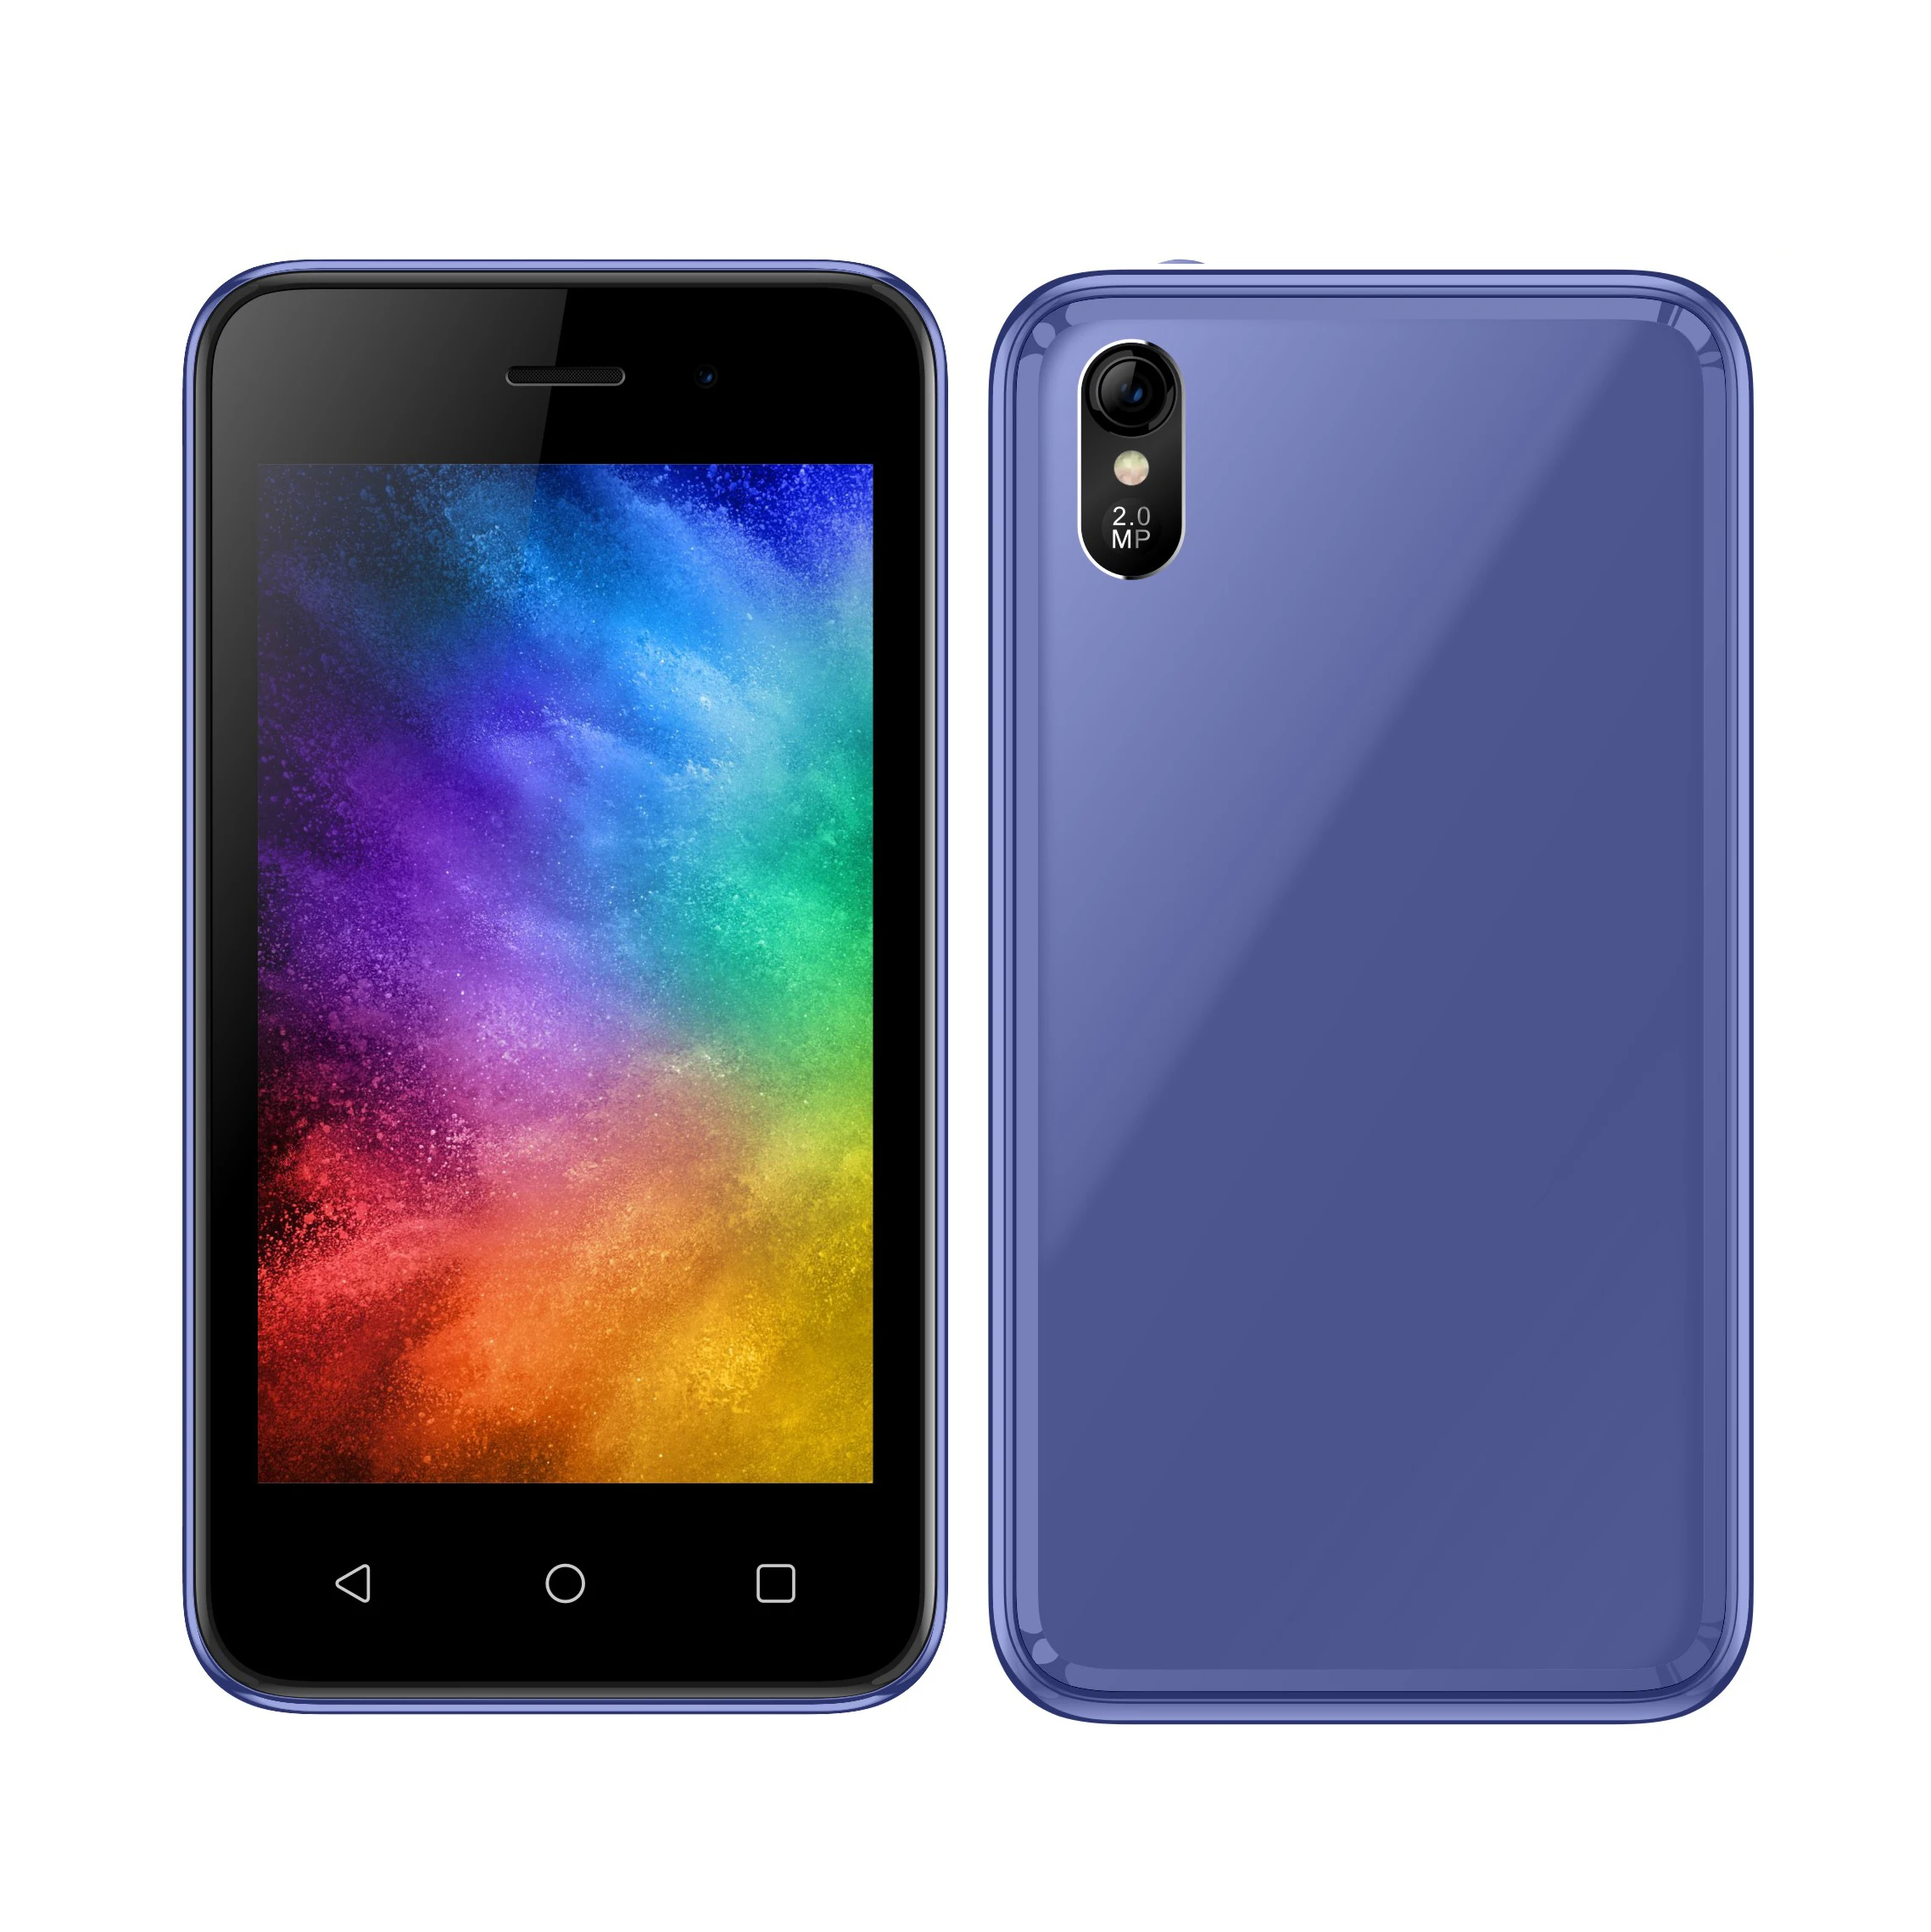 gemiddelde Bermad Tegenover Cheap Price Original 4 Inch Smartphone Entry Level First Price 4inch 3g  Smartphone Mtk6570 Mobile Phone - Buy Cheap Price 4 Inch Smartphone,Cheap  Original Mobile Phones,3g Smartphone 4inch Product on Alibaba.com